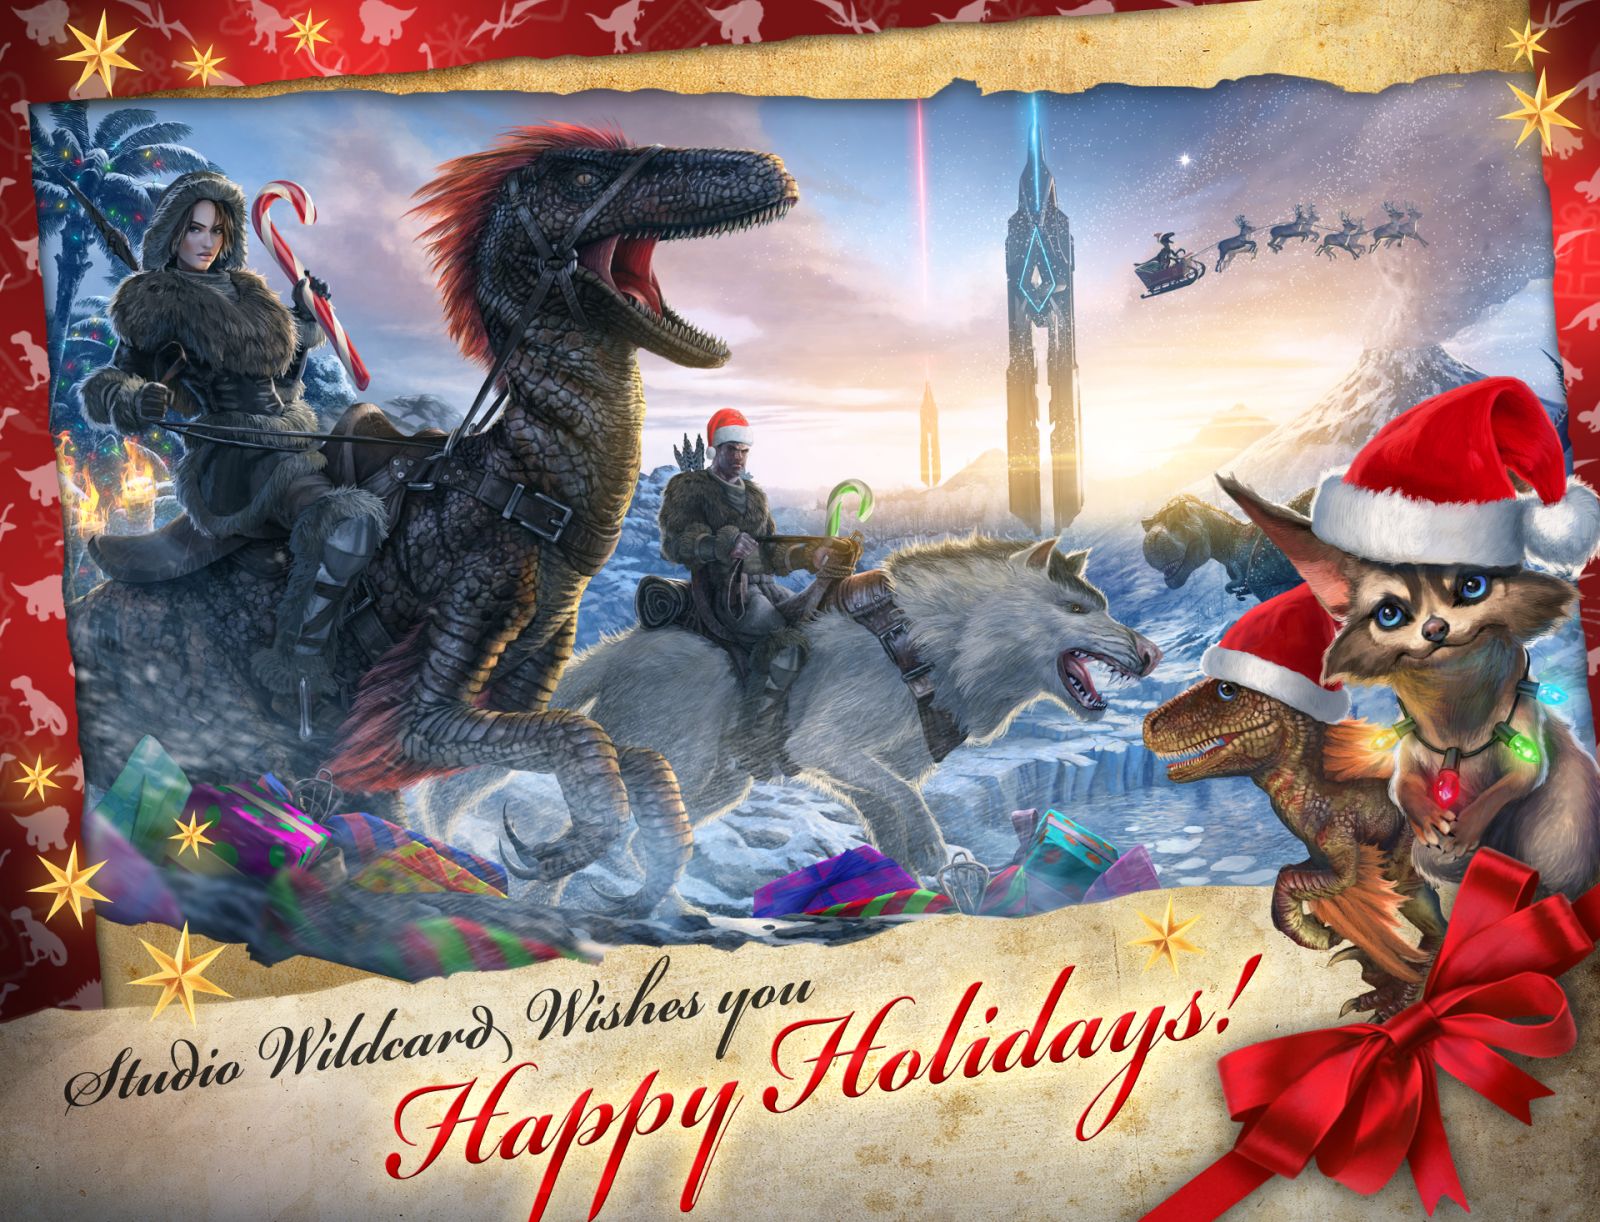 Underwater Caves and Raptor Claus Arrive in Latest ARK Updates